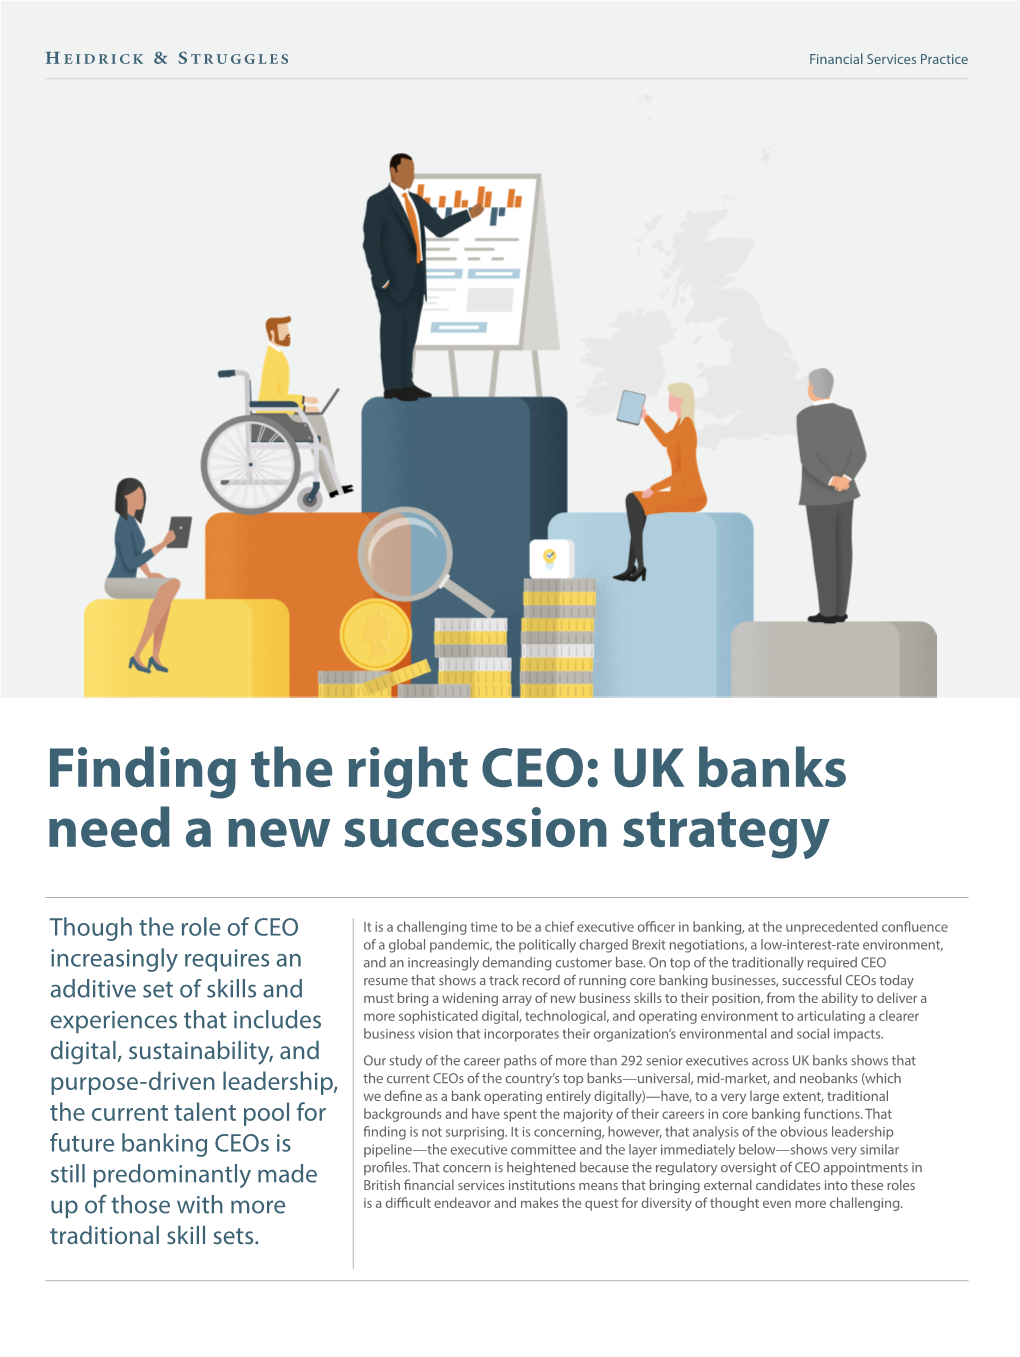 Finding the Right CEO: UK Banks Need a New Succession Strategy